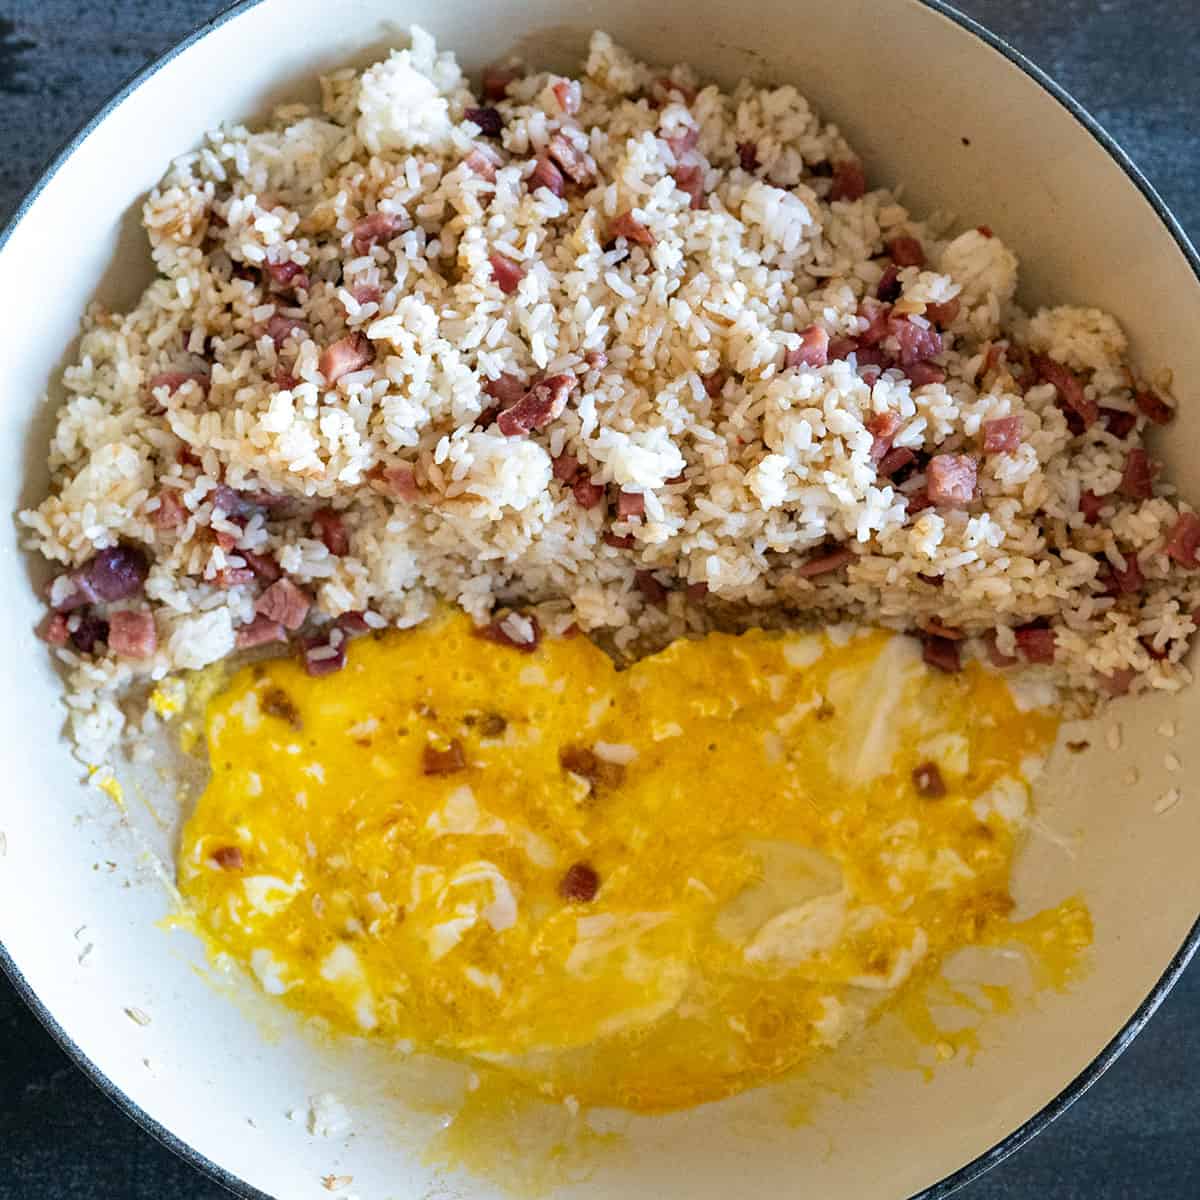 beaten egg added to skillet of ham and rice.